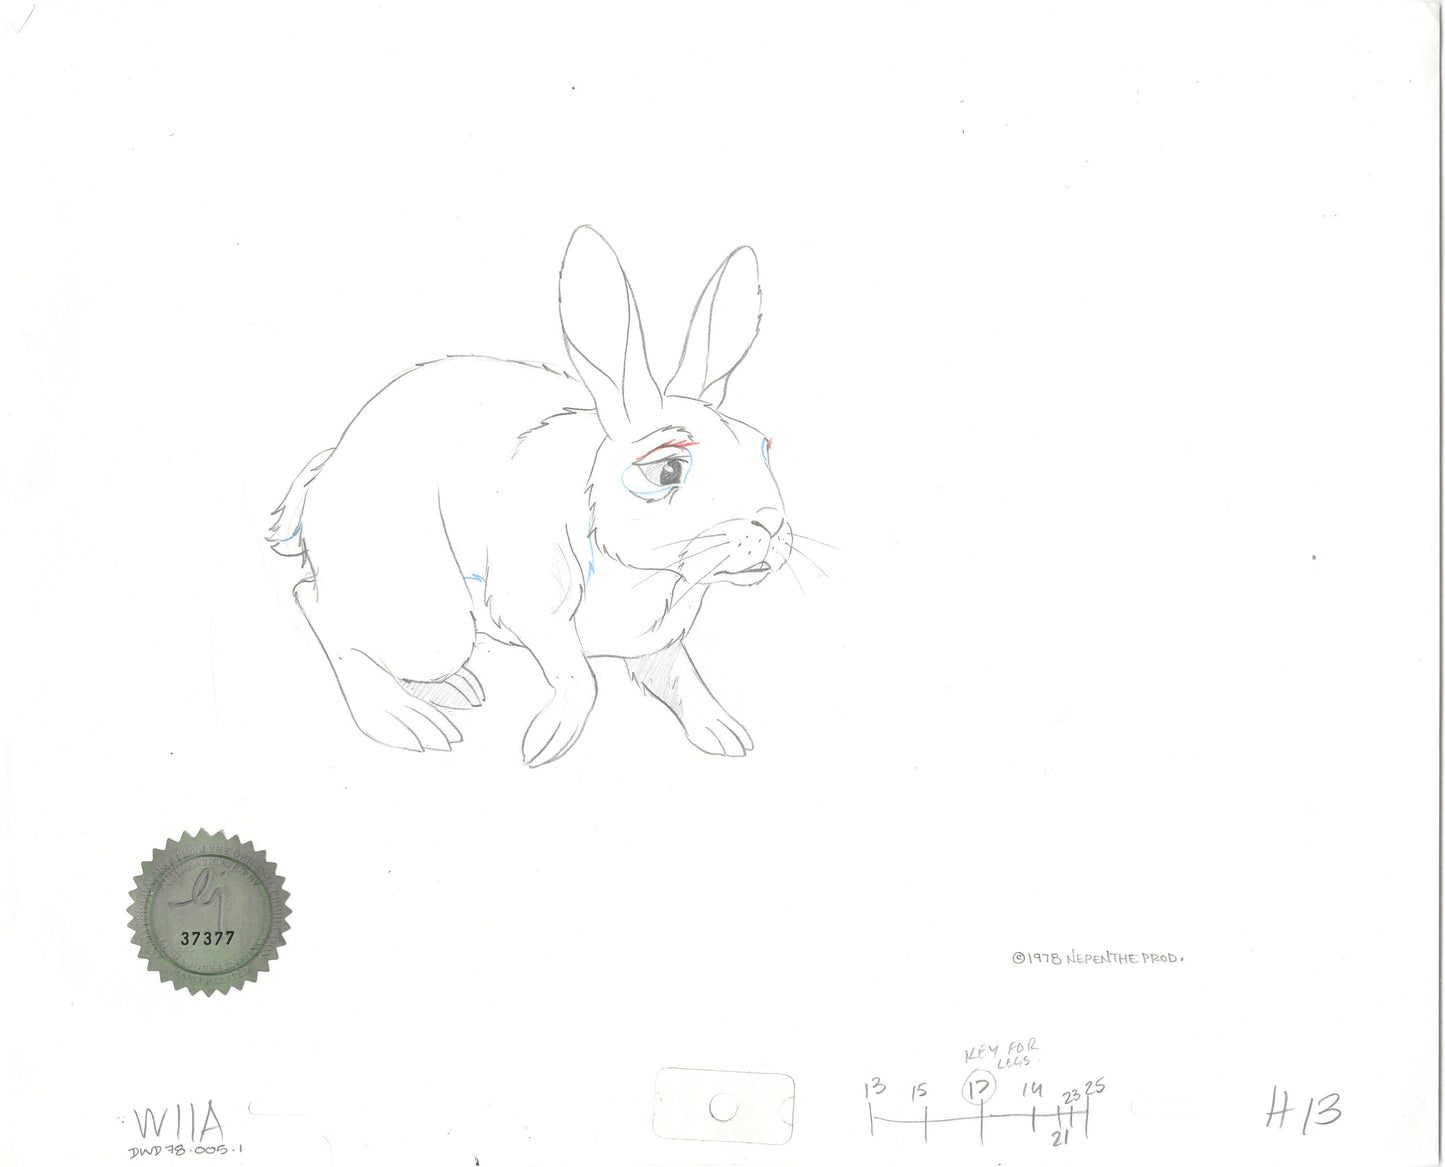 Watership Down 1978 Production Animation Cel Drawing with Linda Jones Enterprise Seal and Certificate of Authenticity 005-001